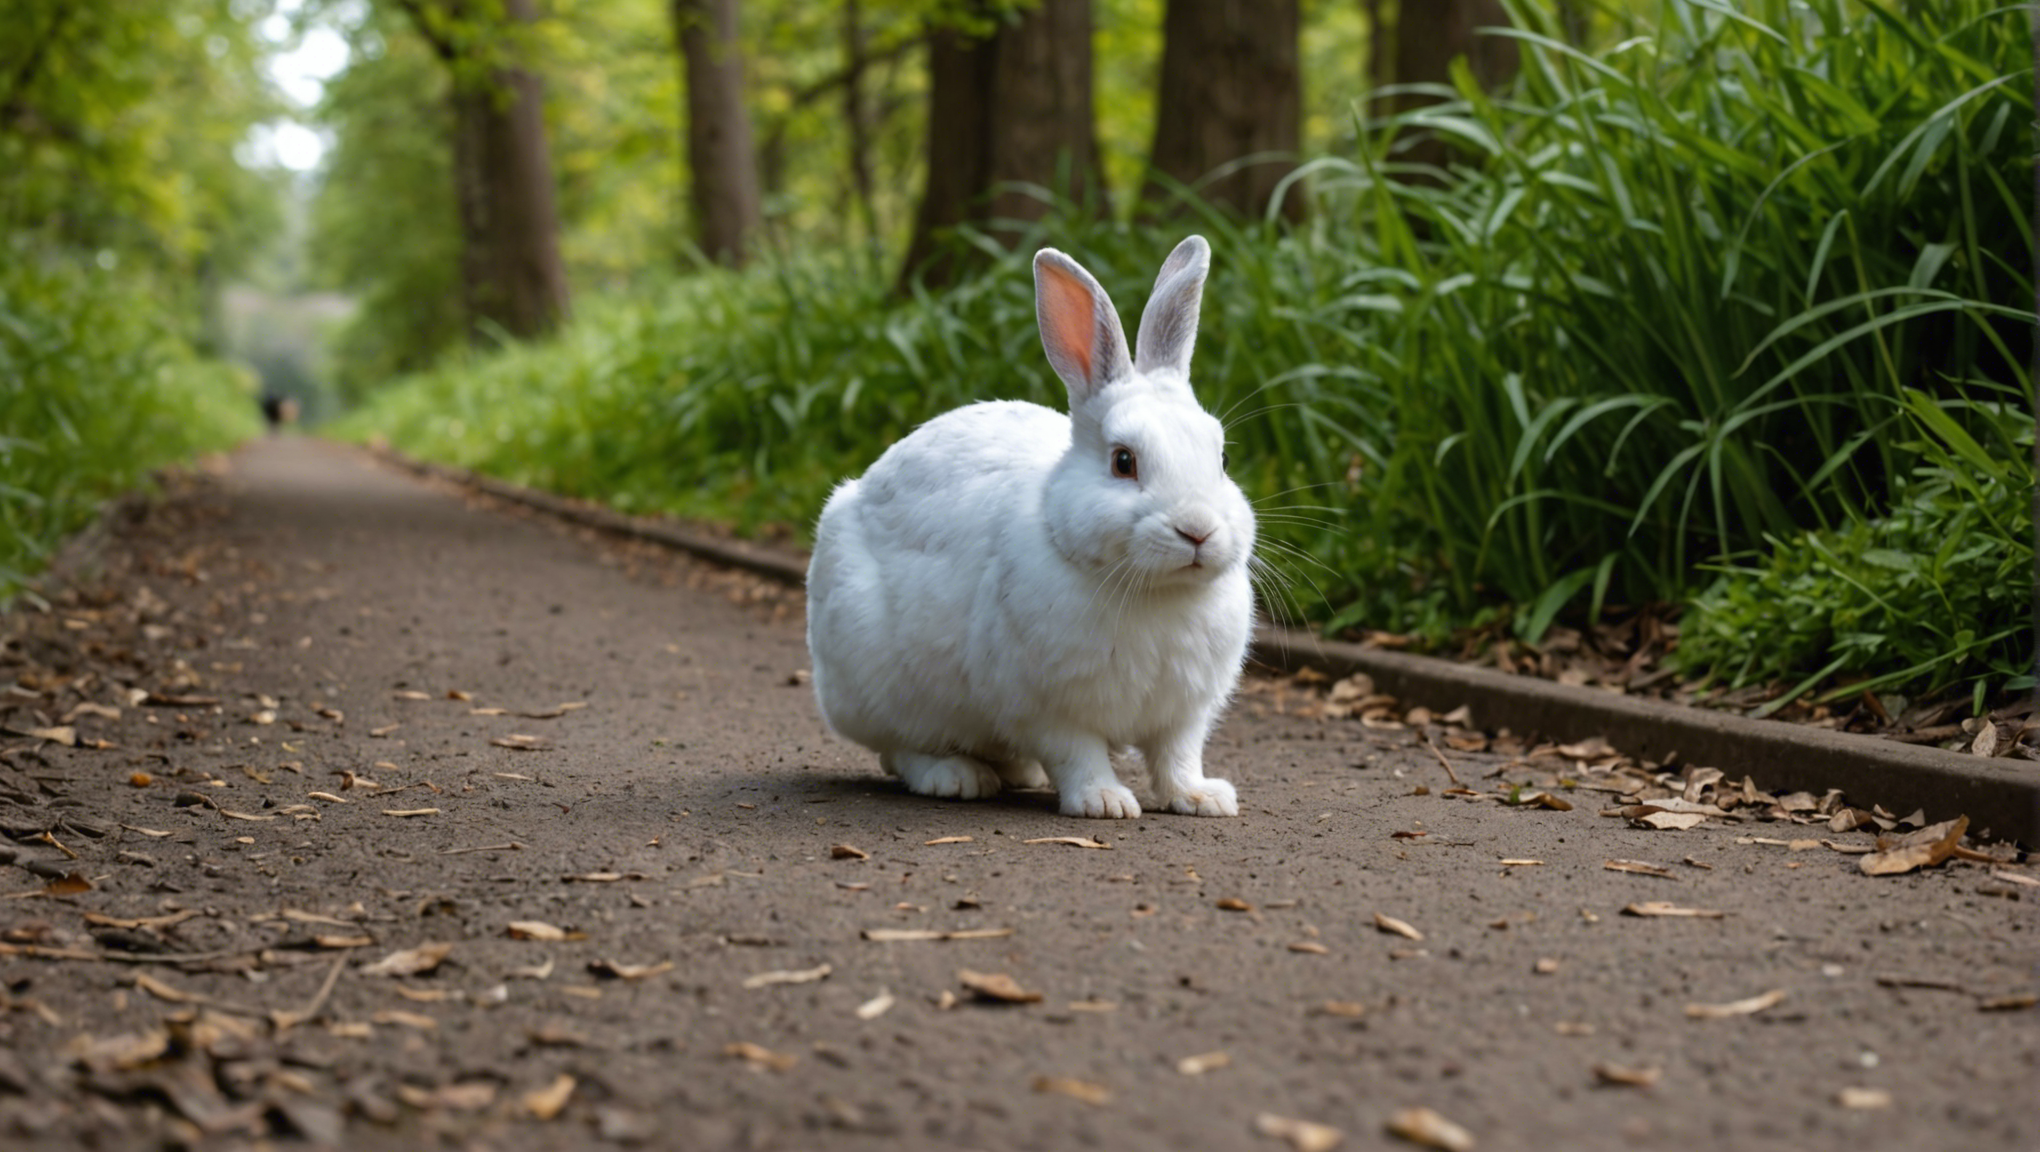 discover the significance of a rabbit crossing your path and its symbolic interpretation in different cultures and belief systems.